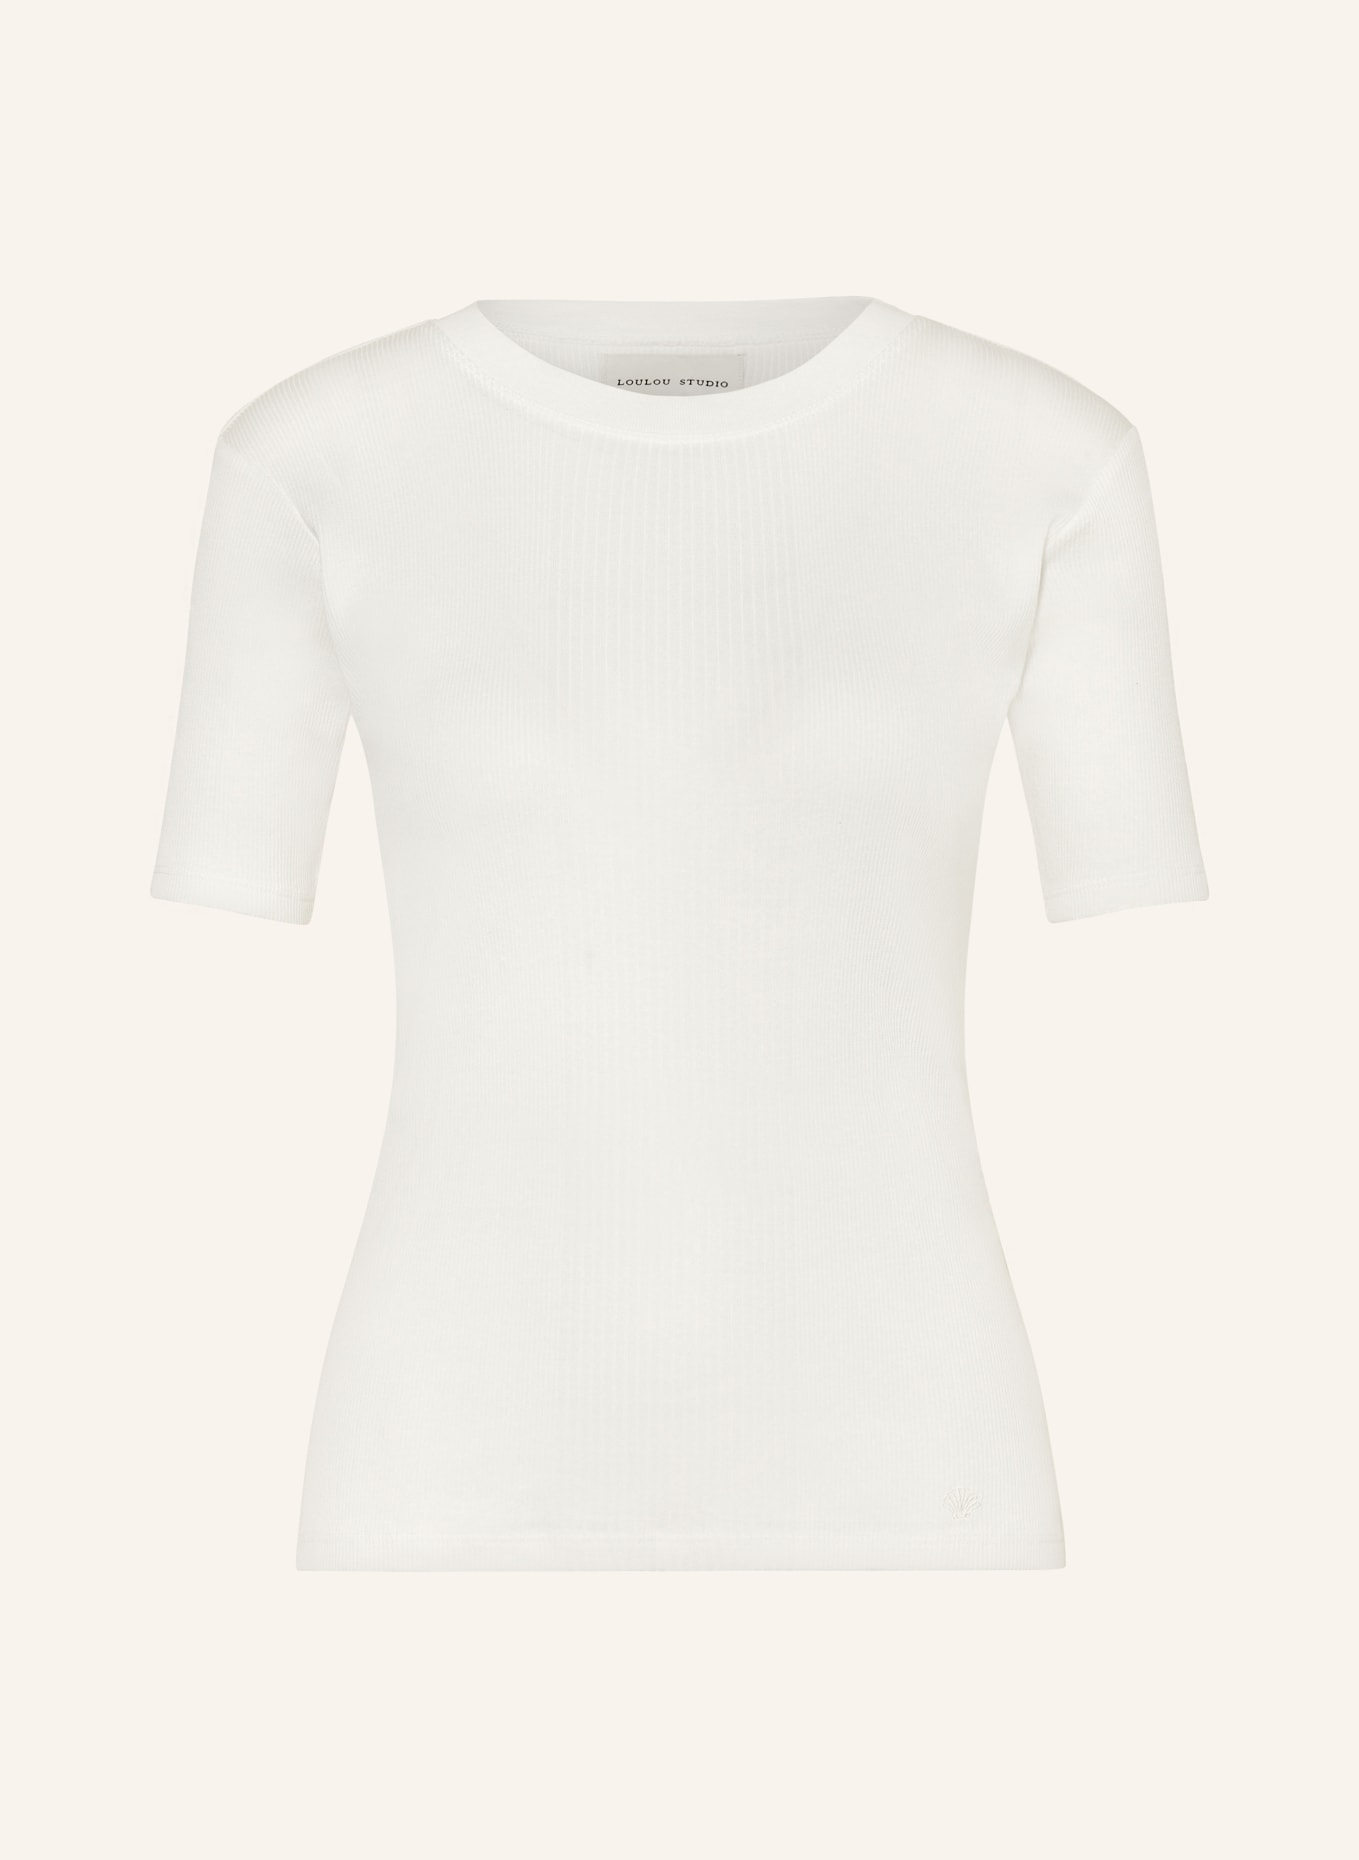 LOULOU STUDIO T-shirt AVALYN, Color: WHITE (Image 1)